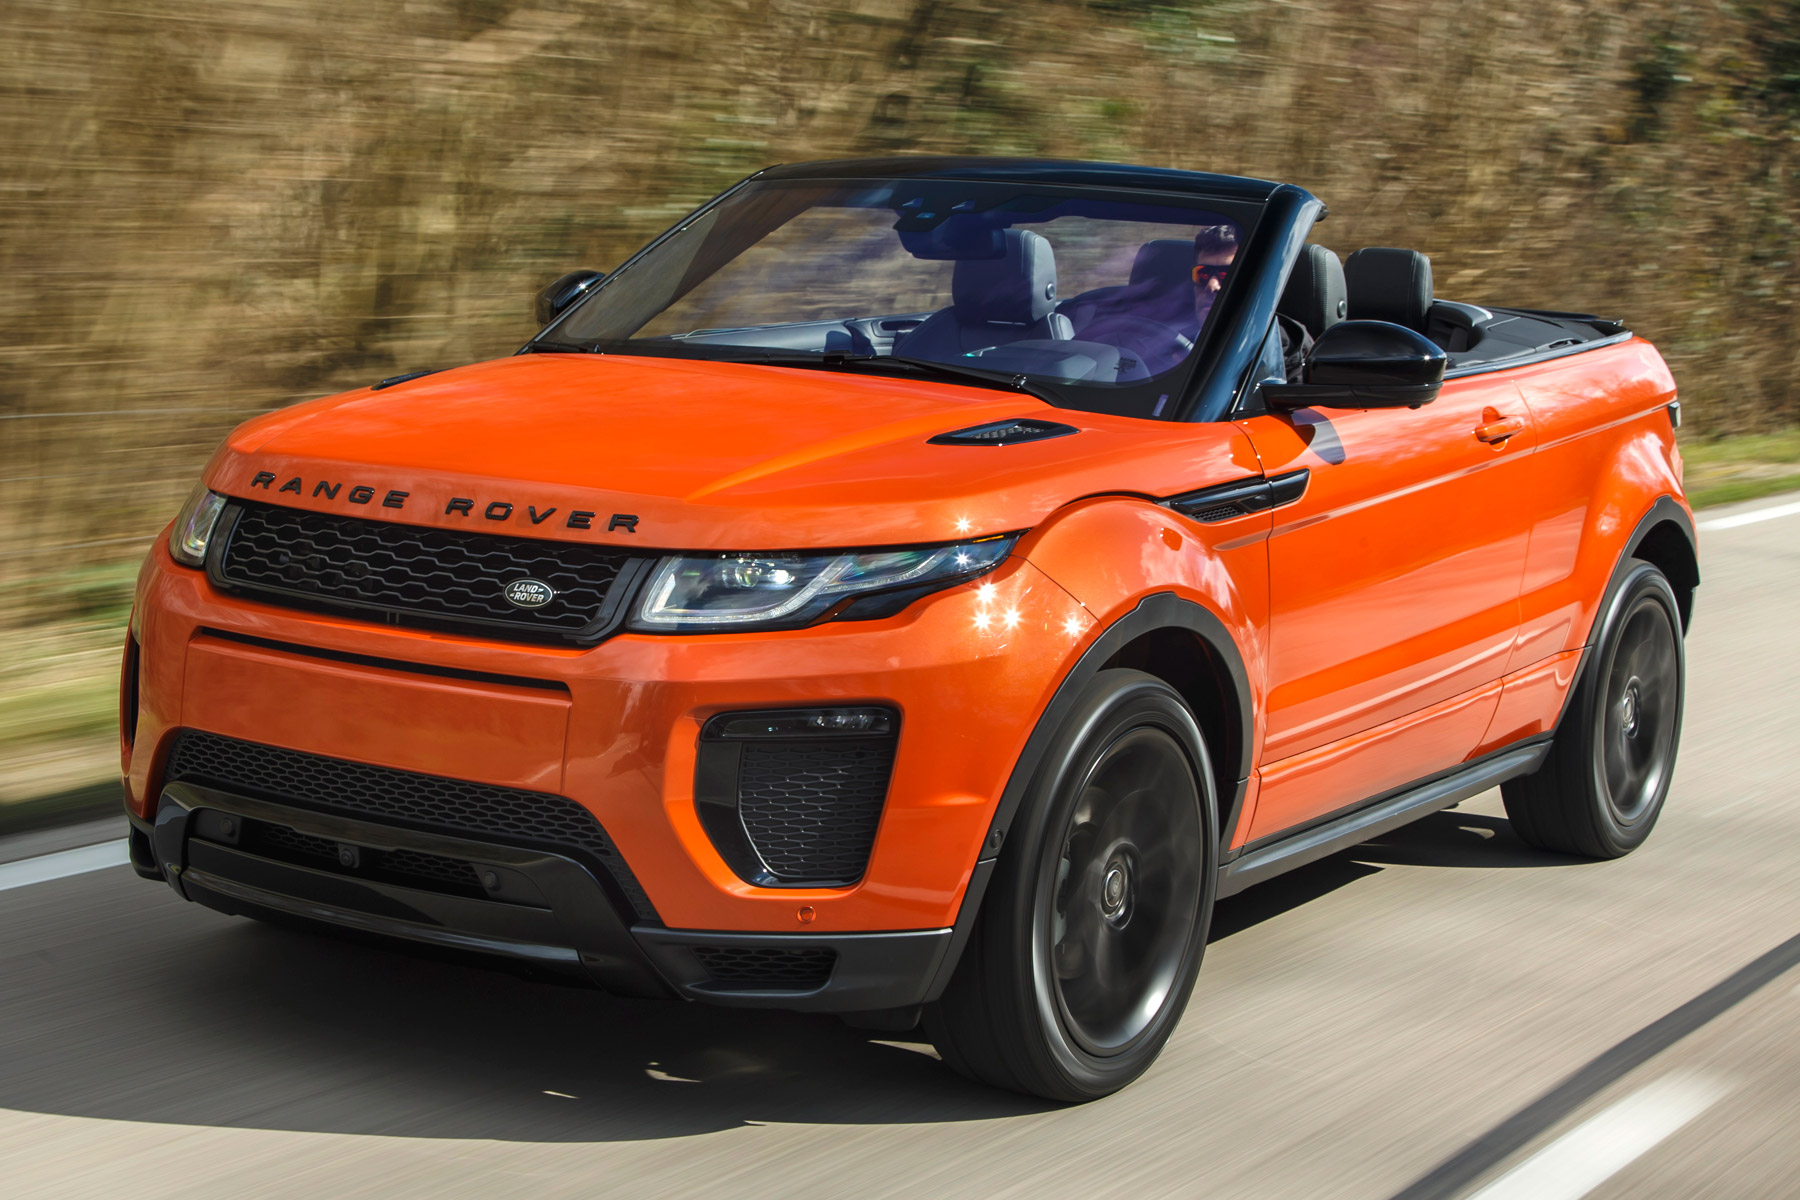 2016 Range Rover Evoque Convertible review first drive Motoring Research